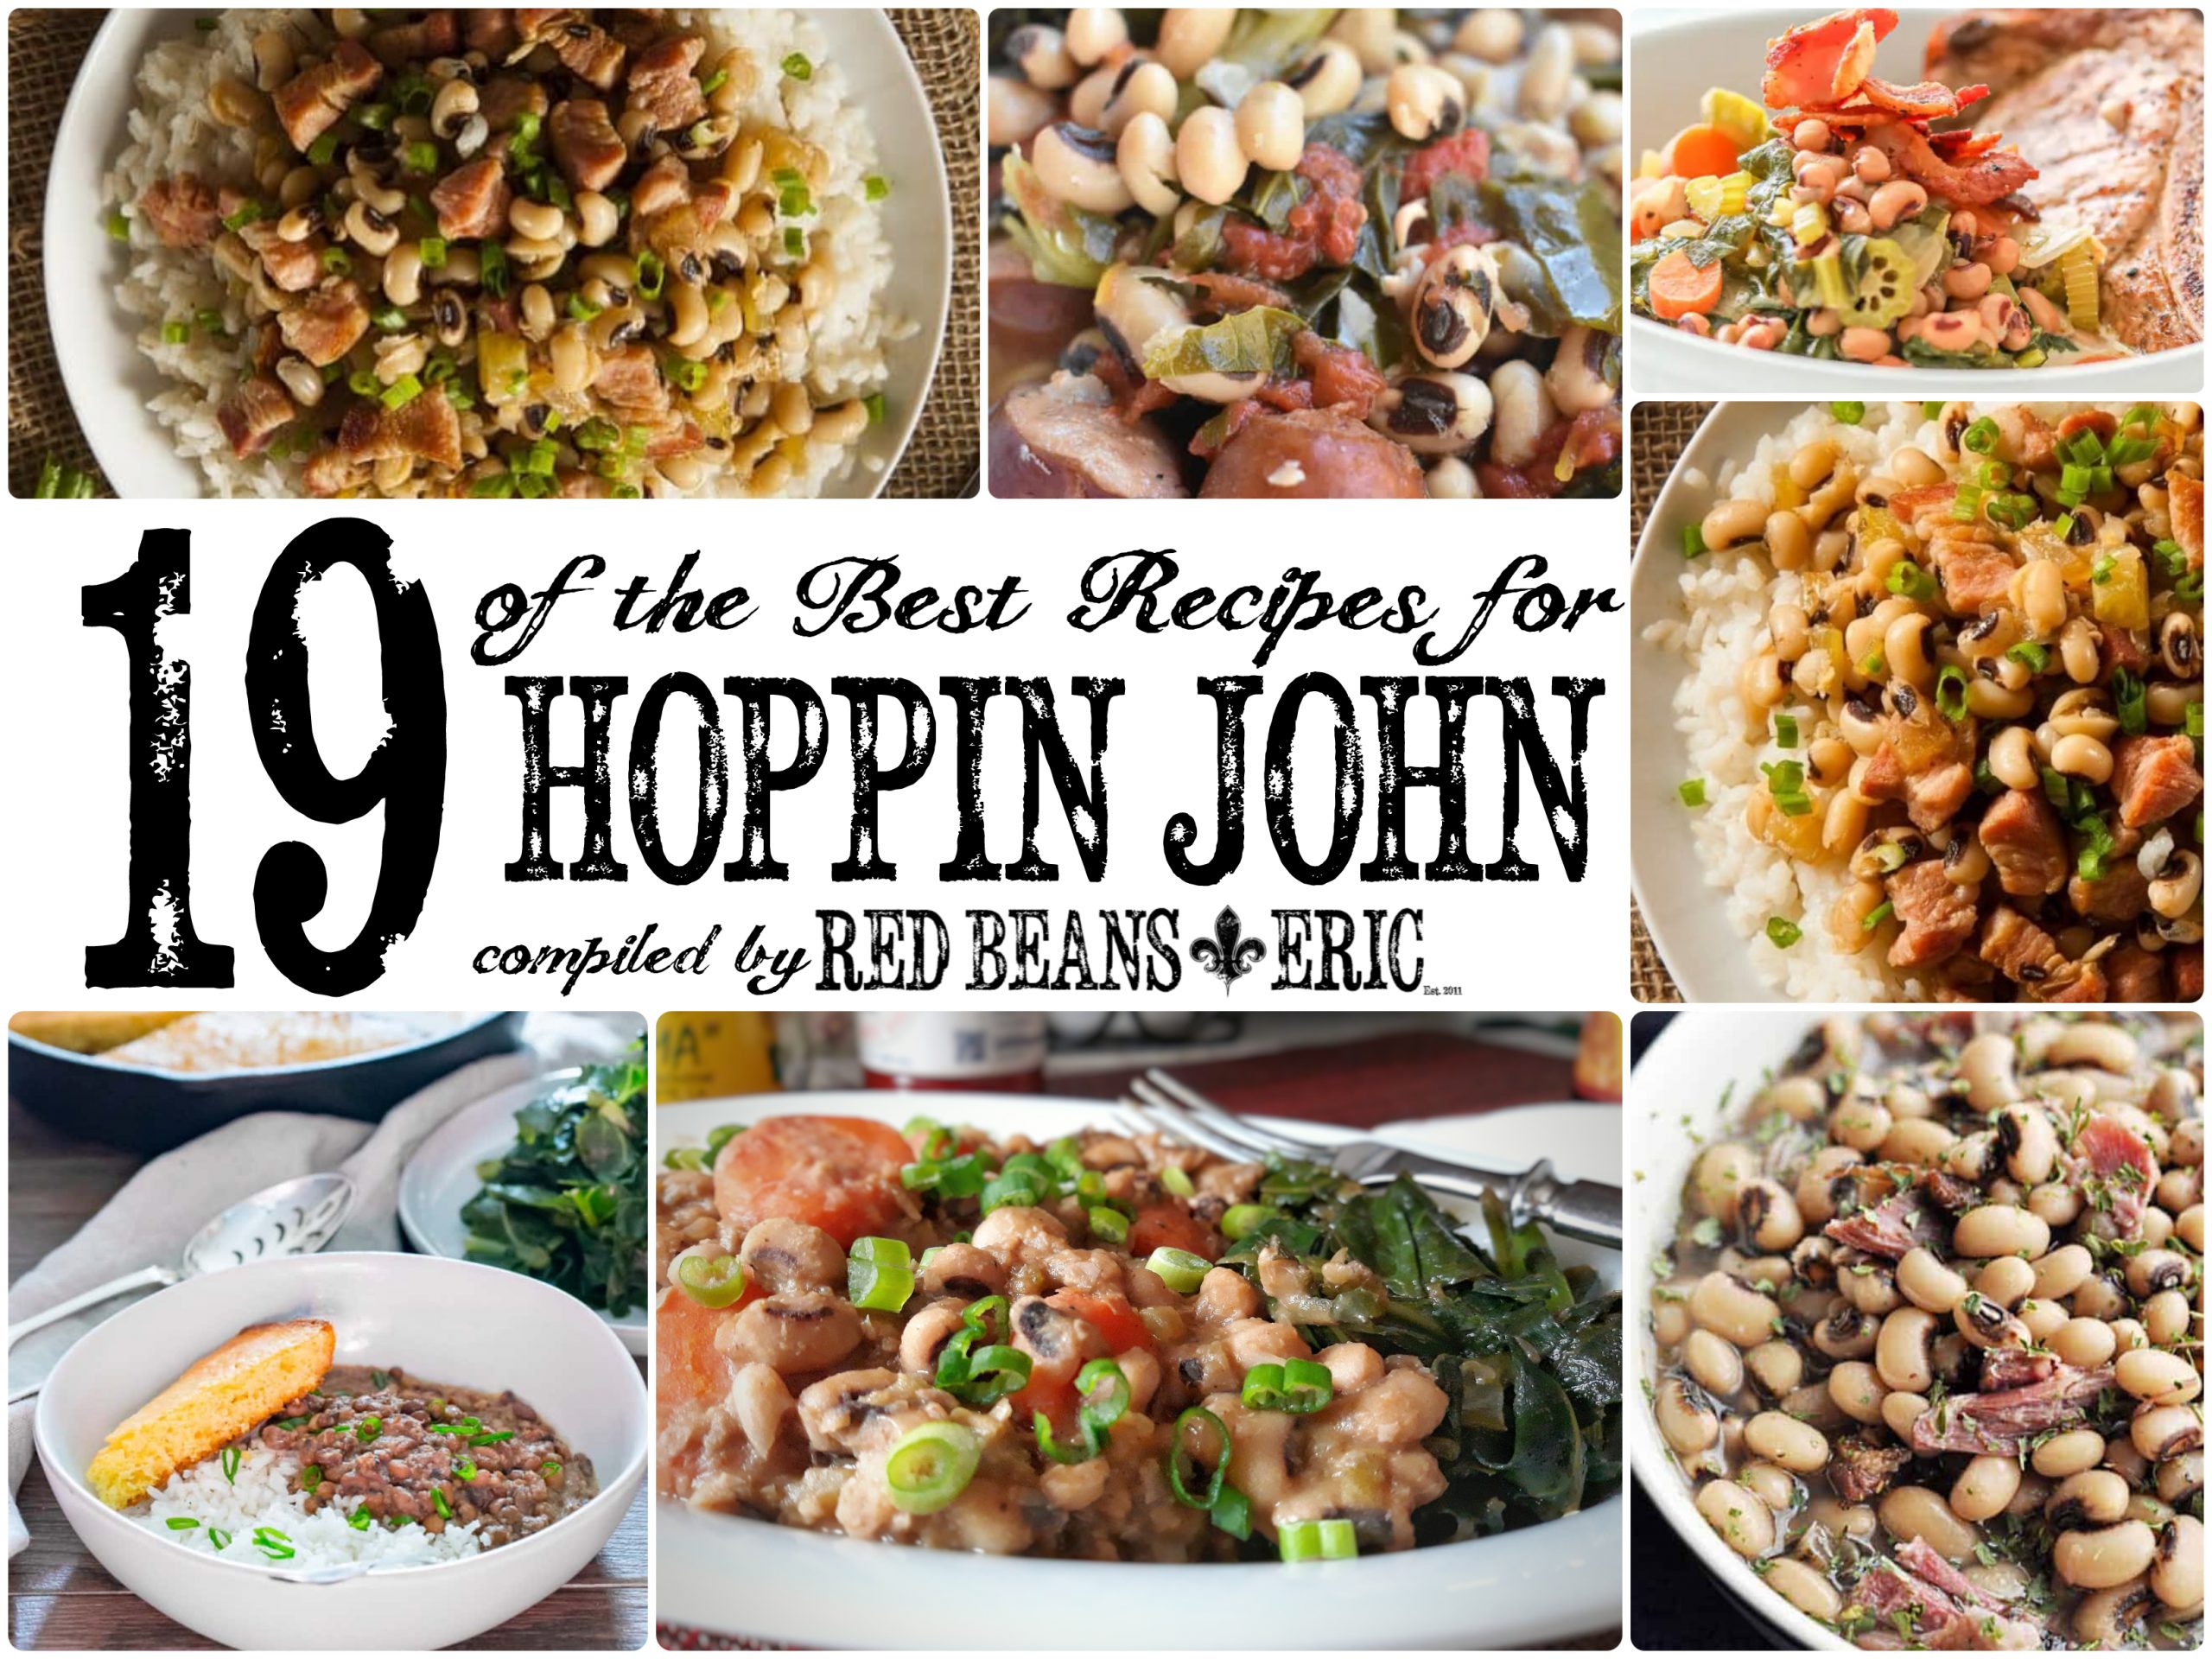 19 of the Best Hoppin' John Recipes for the New Year